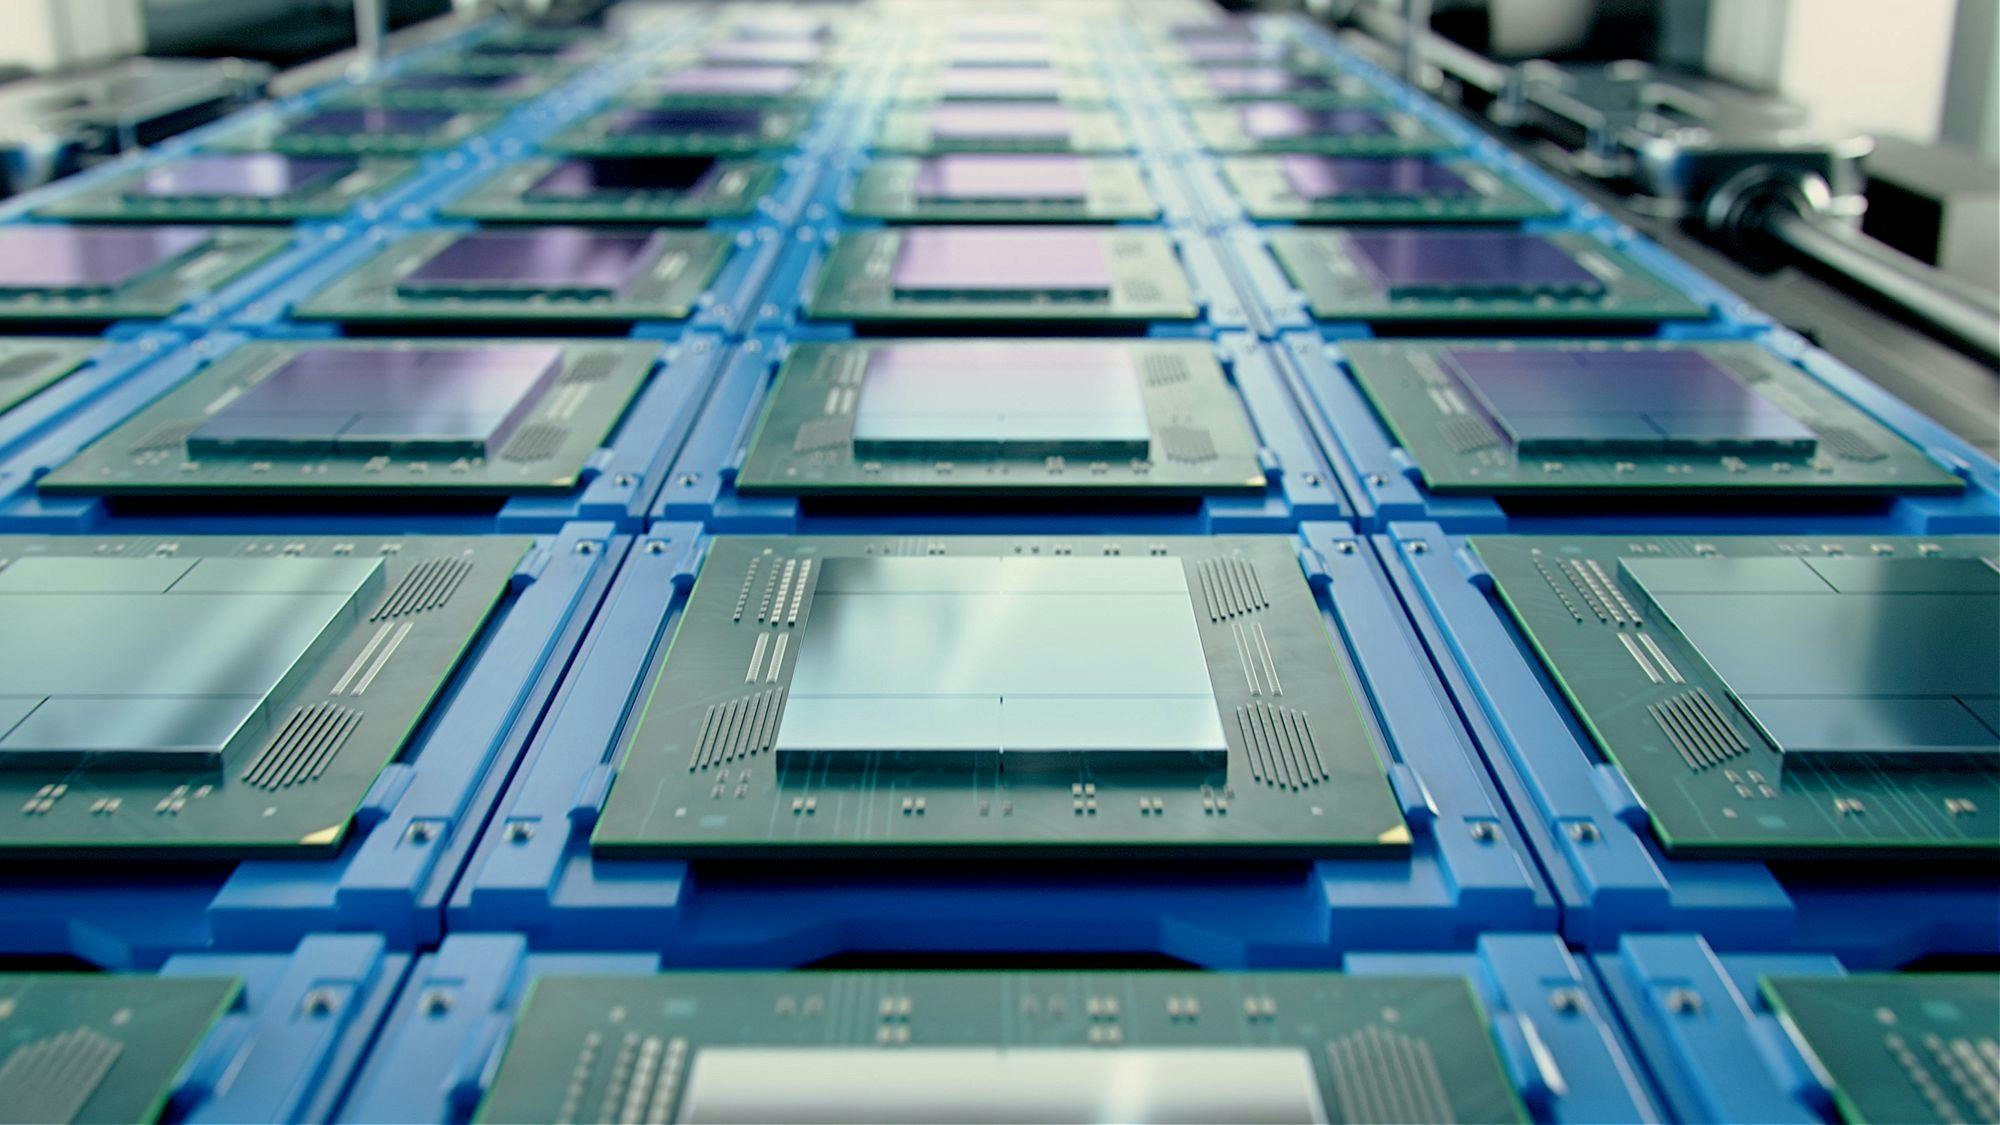 Shot of Computer Processor Production Line at Advanced Semiconductor Foundry in Bright Environment